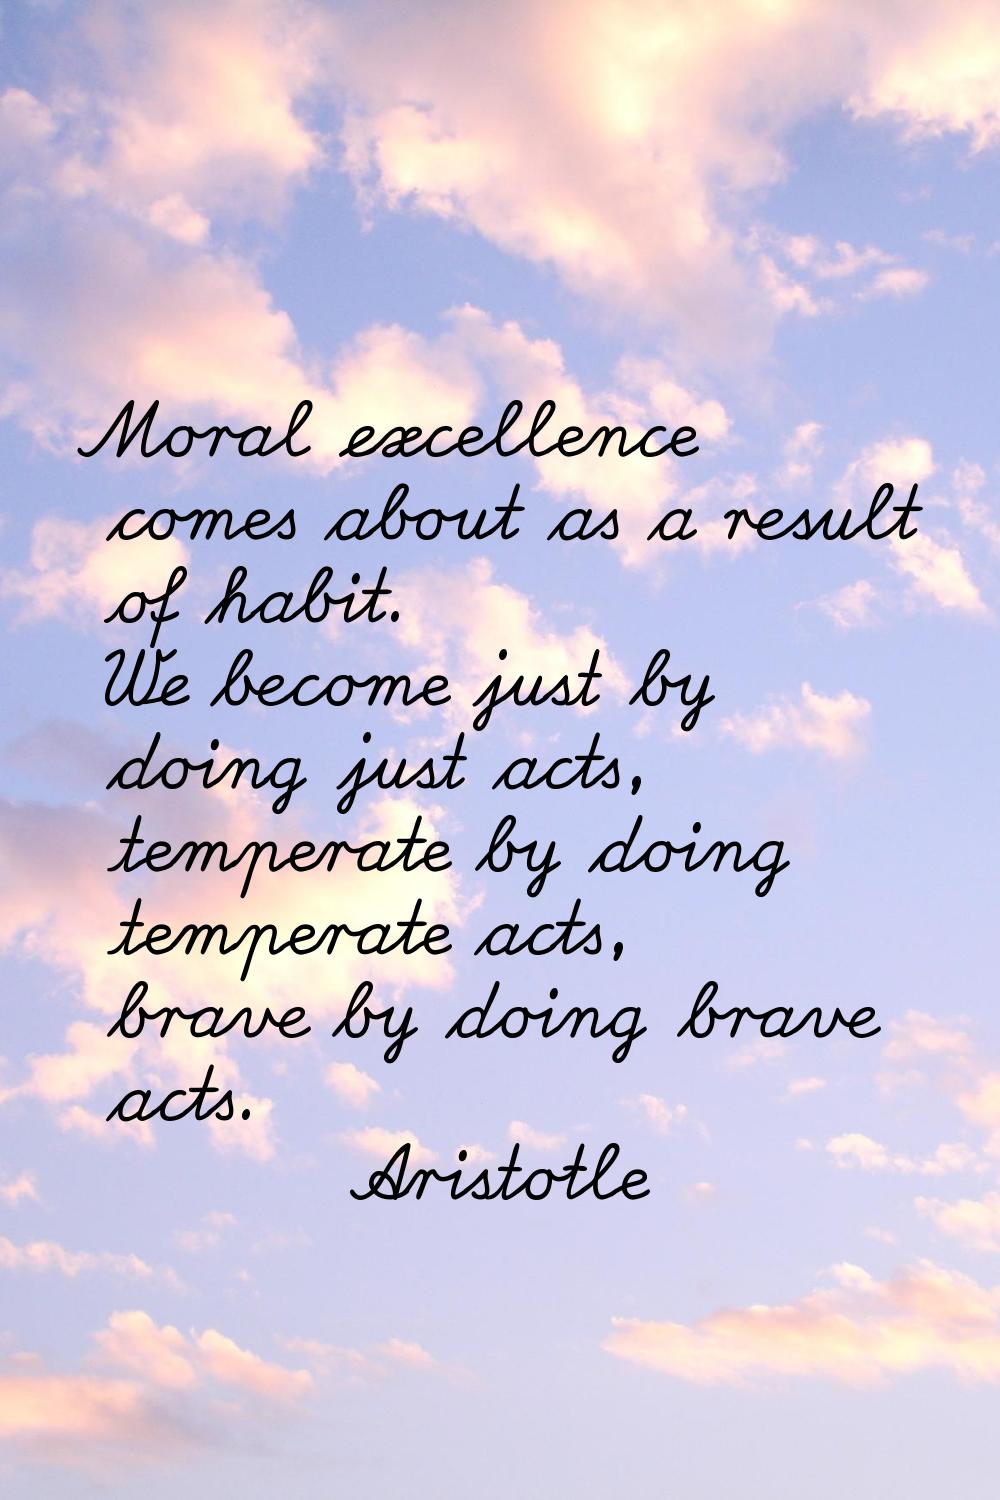 Moral excellence comes about as a result of habit. We become just by doing just acts, temperate by 